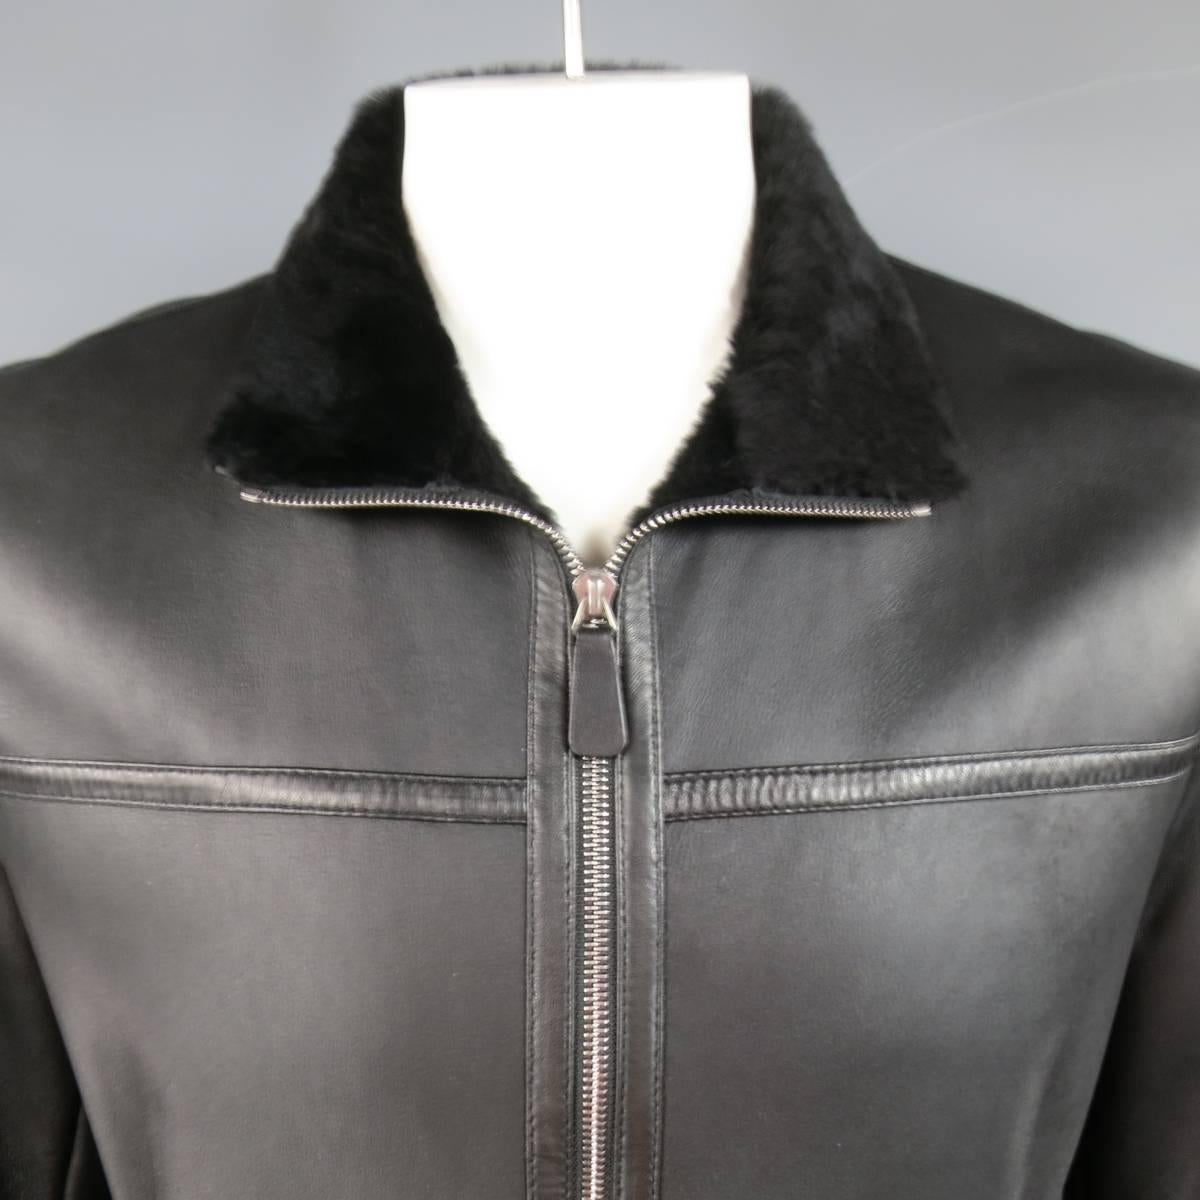 ORME IN PORTOFINO winter jacket in smooth black lamb leather with ultra soft fur shearling lining featuring a silver tone zip front, snap pockets, and high neck. Made in Italy.
 
Excellent Pre-Owned Condition.
Marked: IT 52
 
Measurements:
